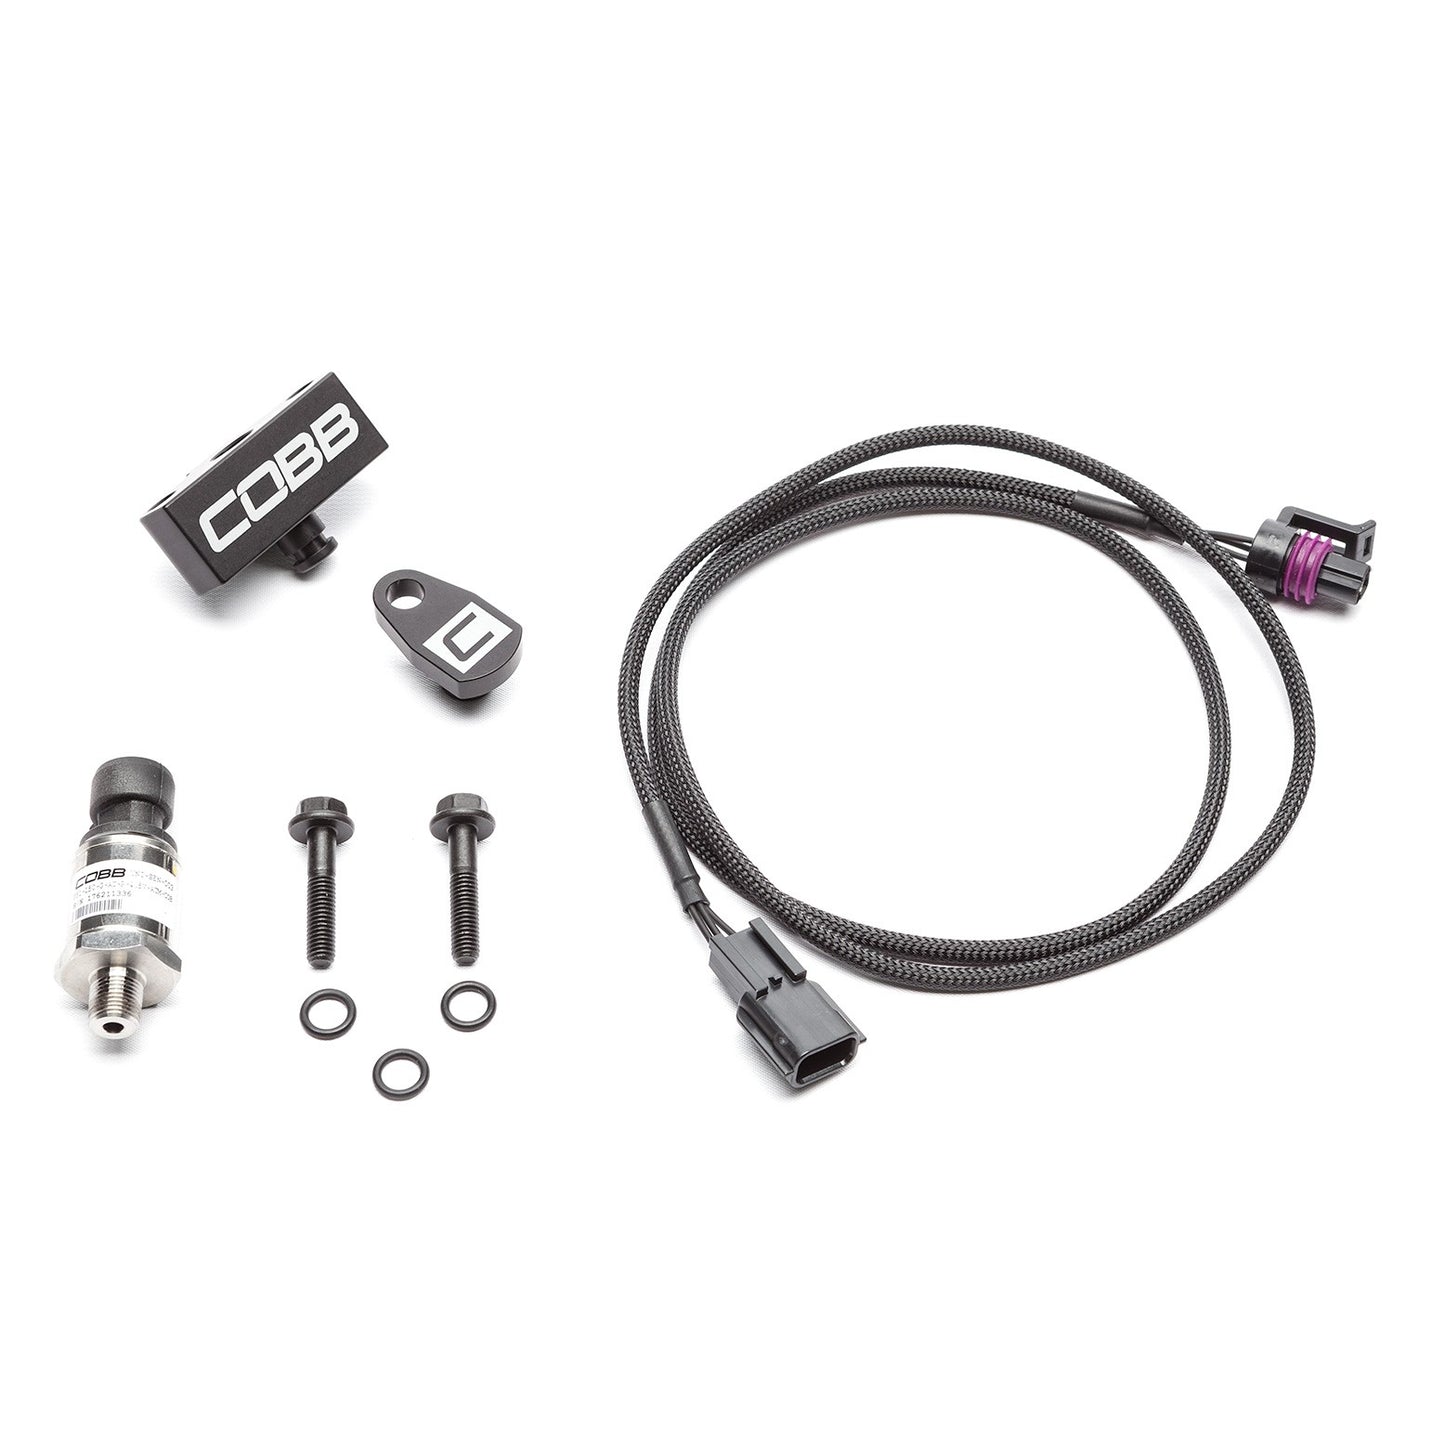 Total Racing Products Plug and Play Fuel Pressure Kit – R35 GTR